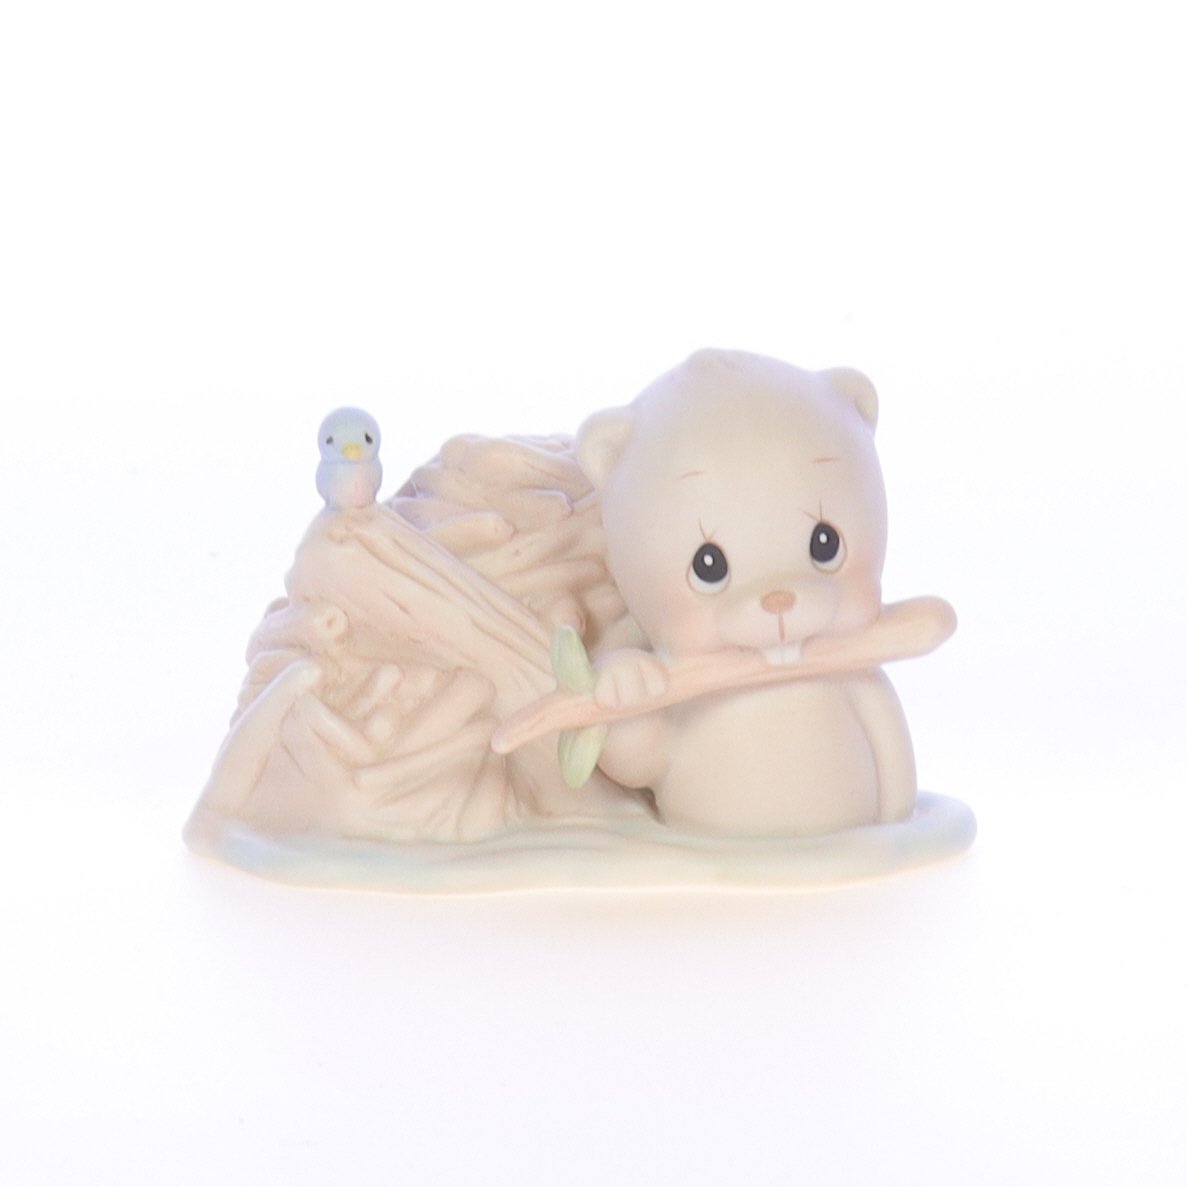 Precious_Moments_Porcelain_Figurine_Every_Mans_House_Is_His_Castle_BC921_01.jpg